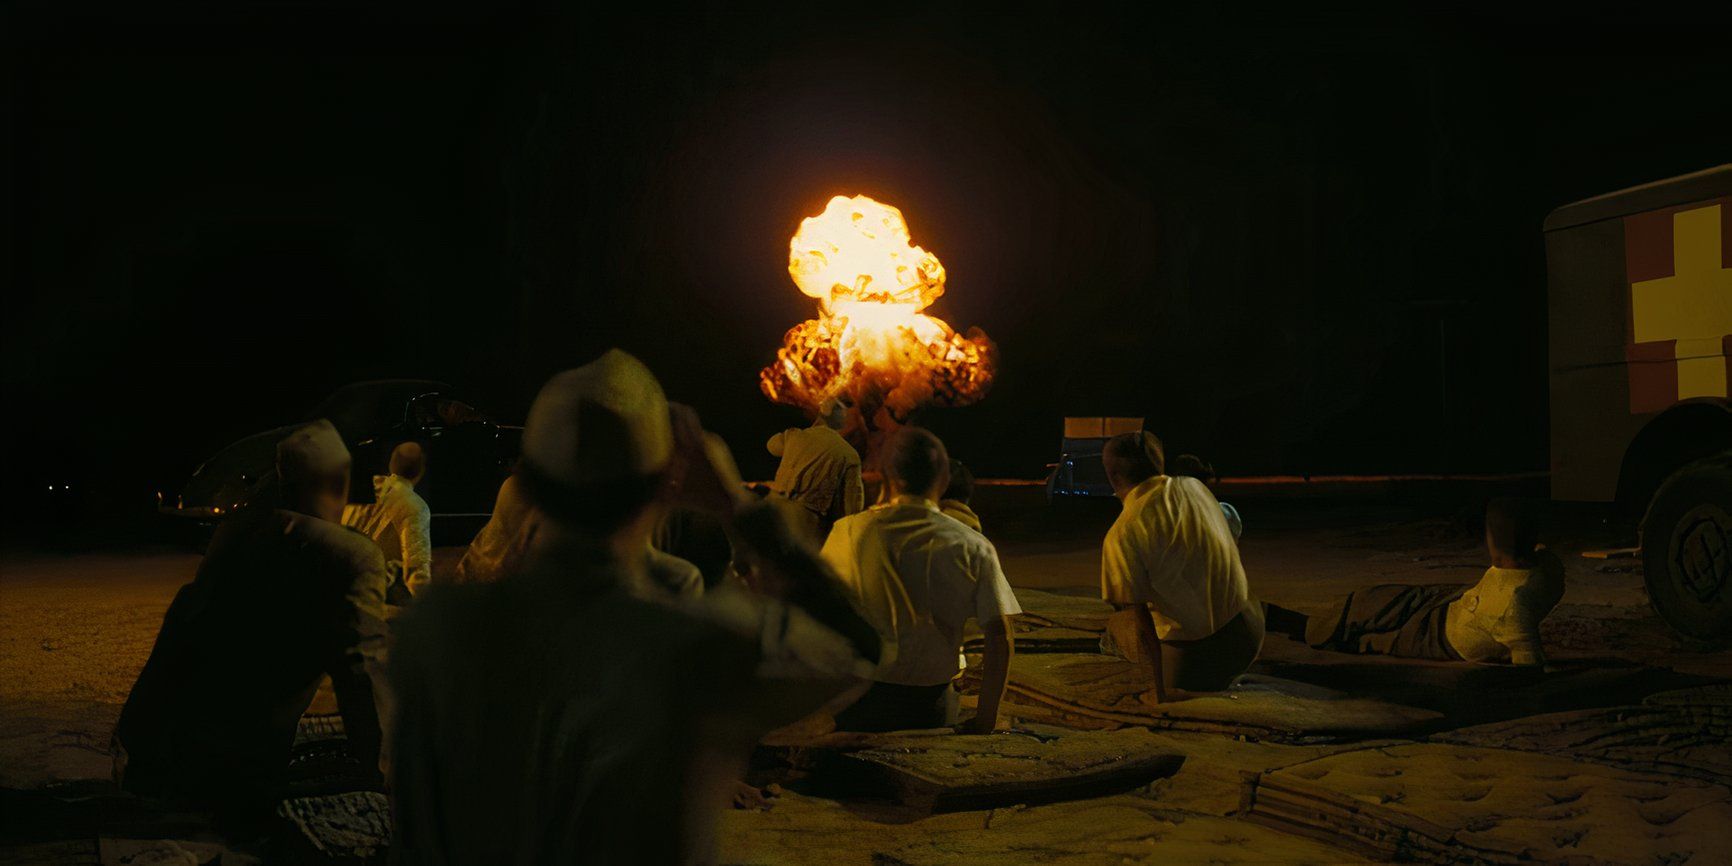 Physicists watching the detonation of the atomic bomb at Los Alamos in Oppenheimer